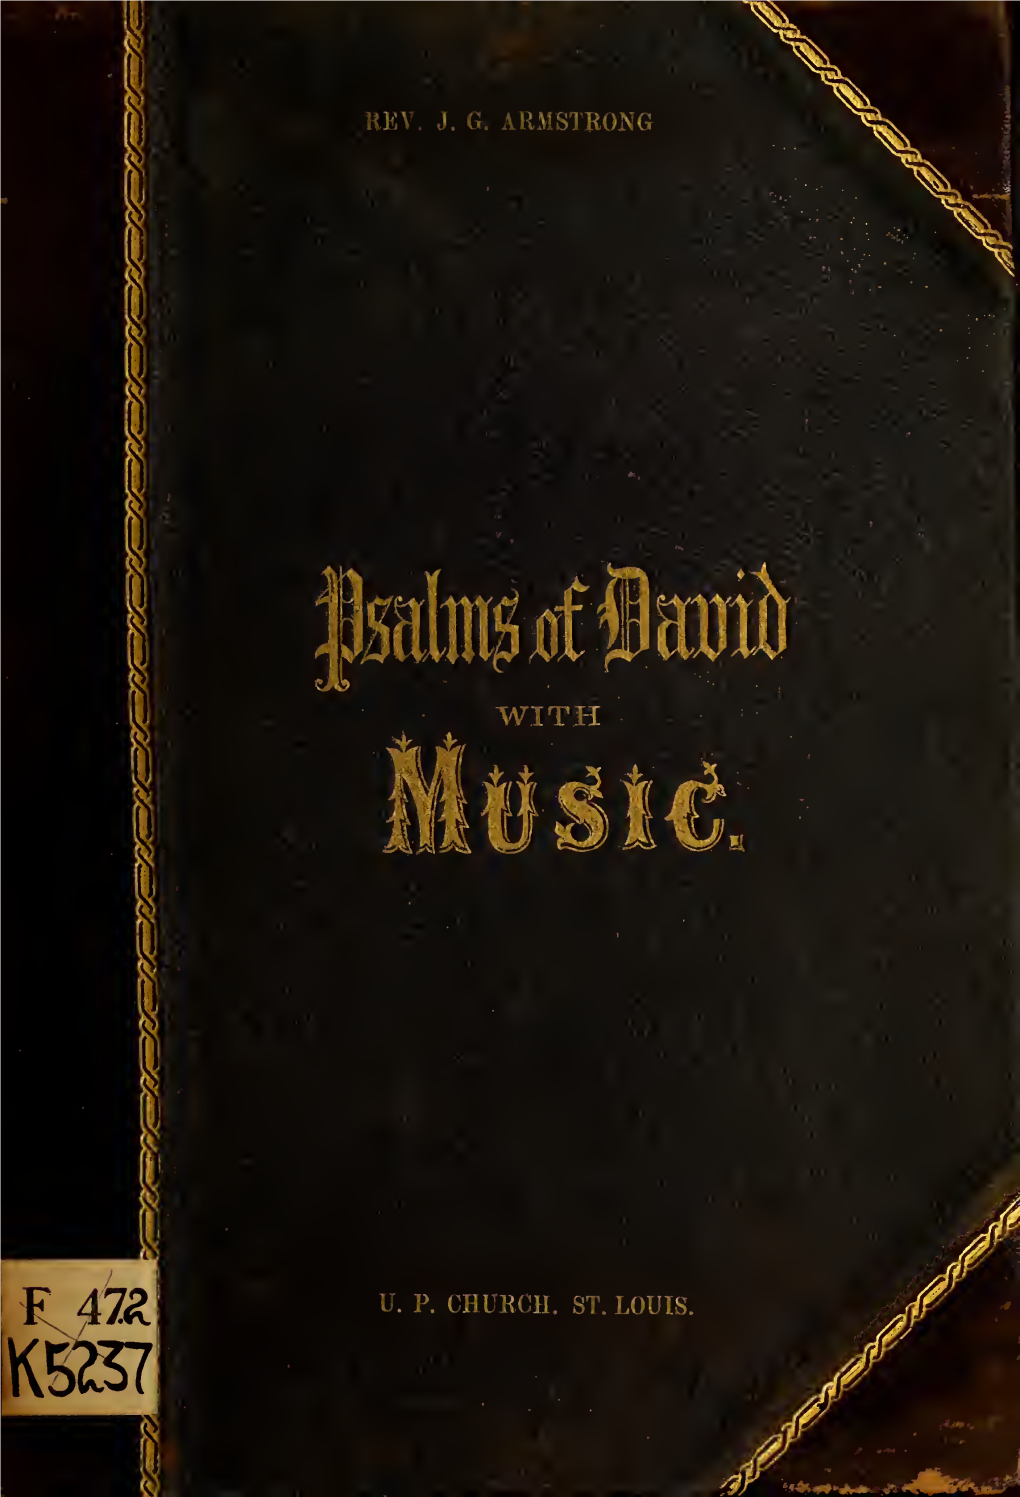 The Psalms of David Are Used in Public Worship